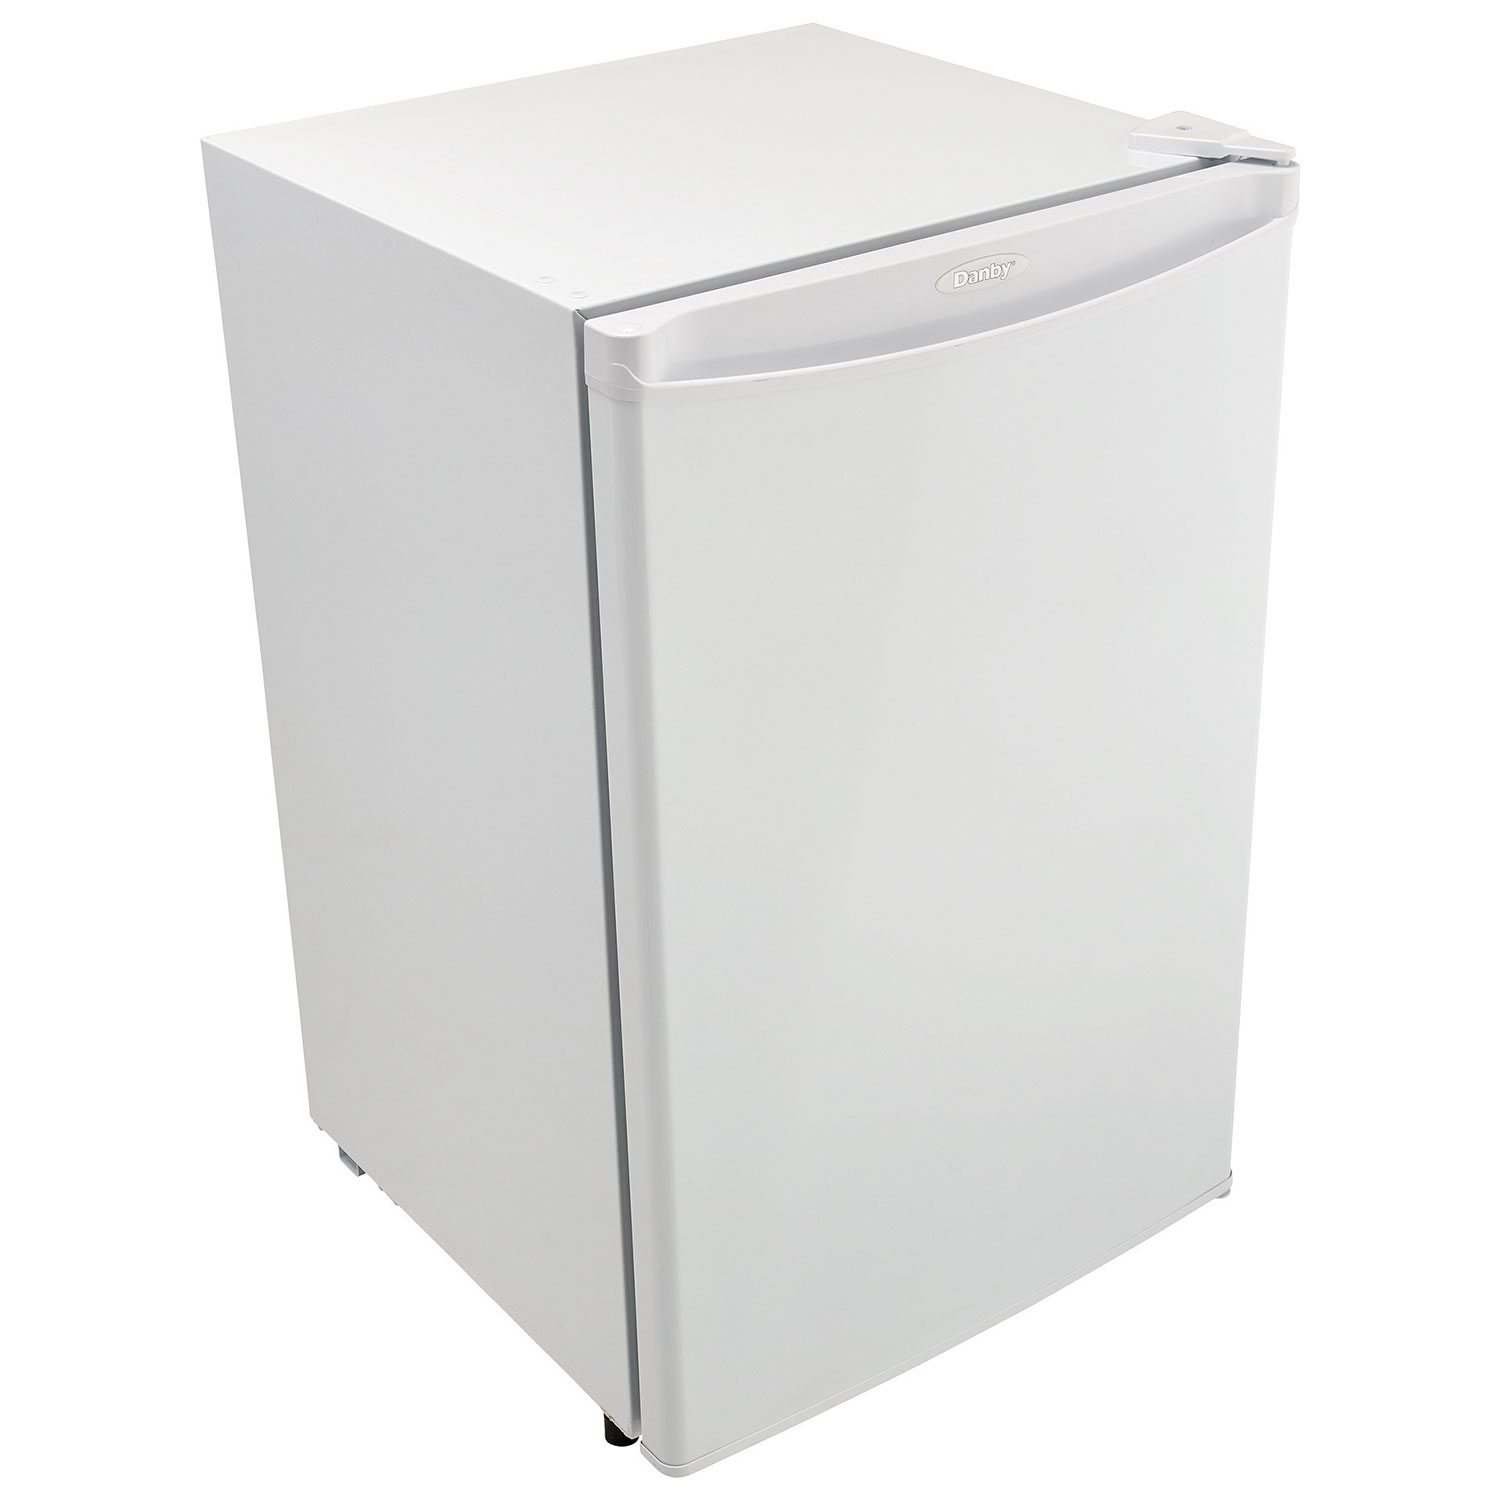 Are reviews of Danby freezers generally positive?